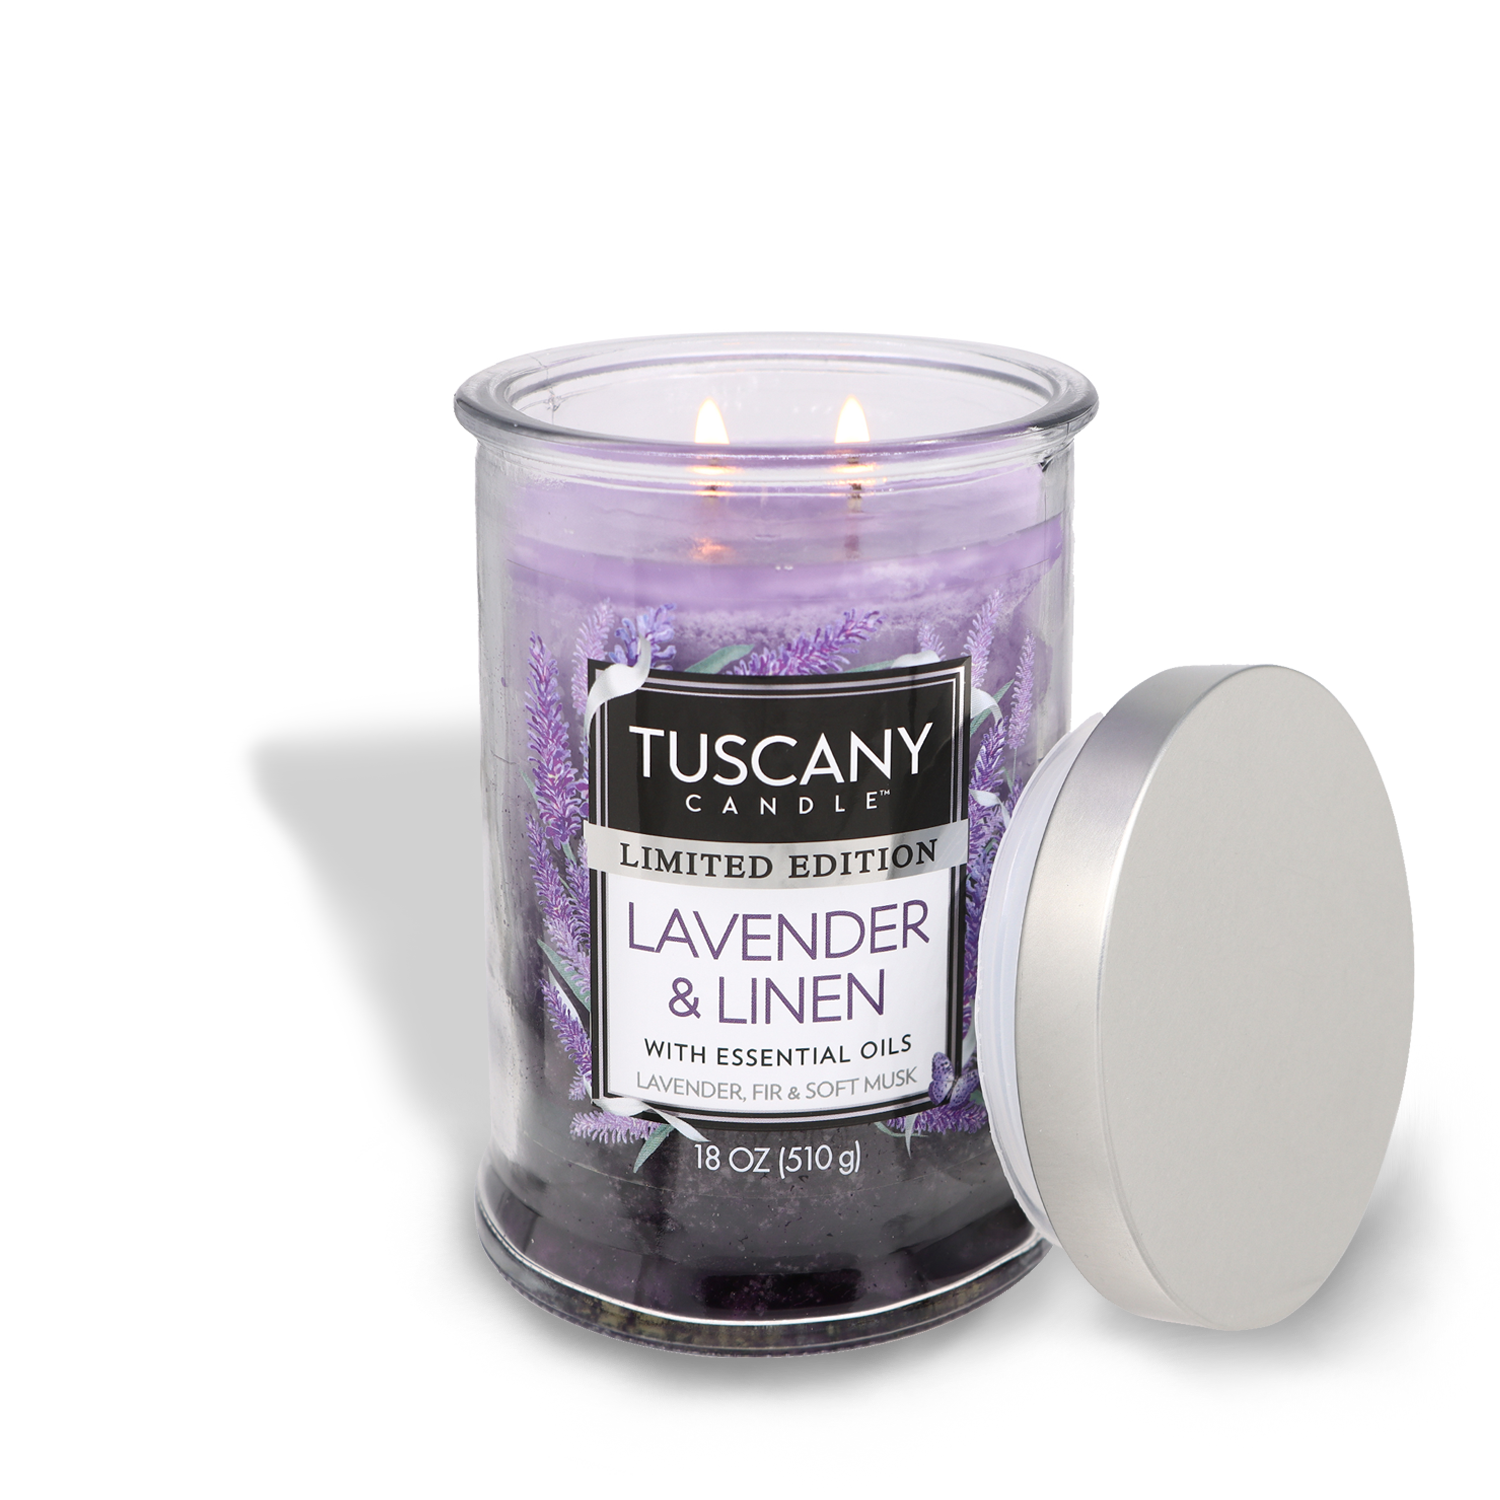 Lavender Linen Long-Lasting Scented Jar Candle (18 oz) inspired by Tuscany Candle® SEASONAL.